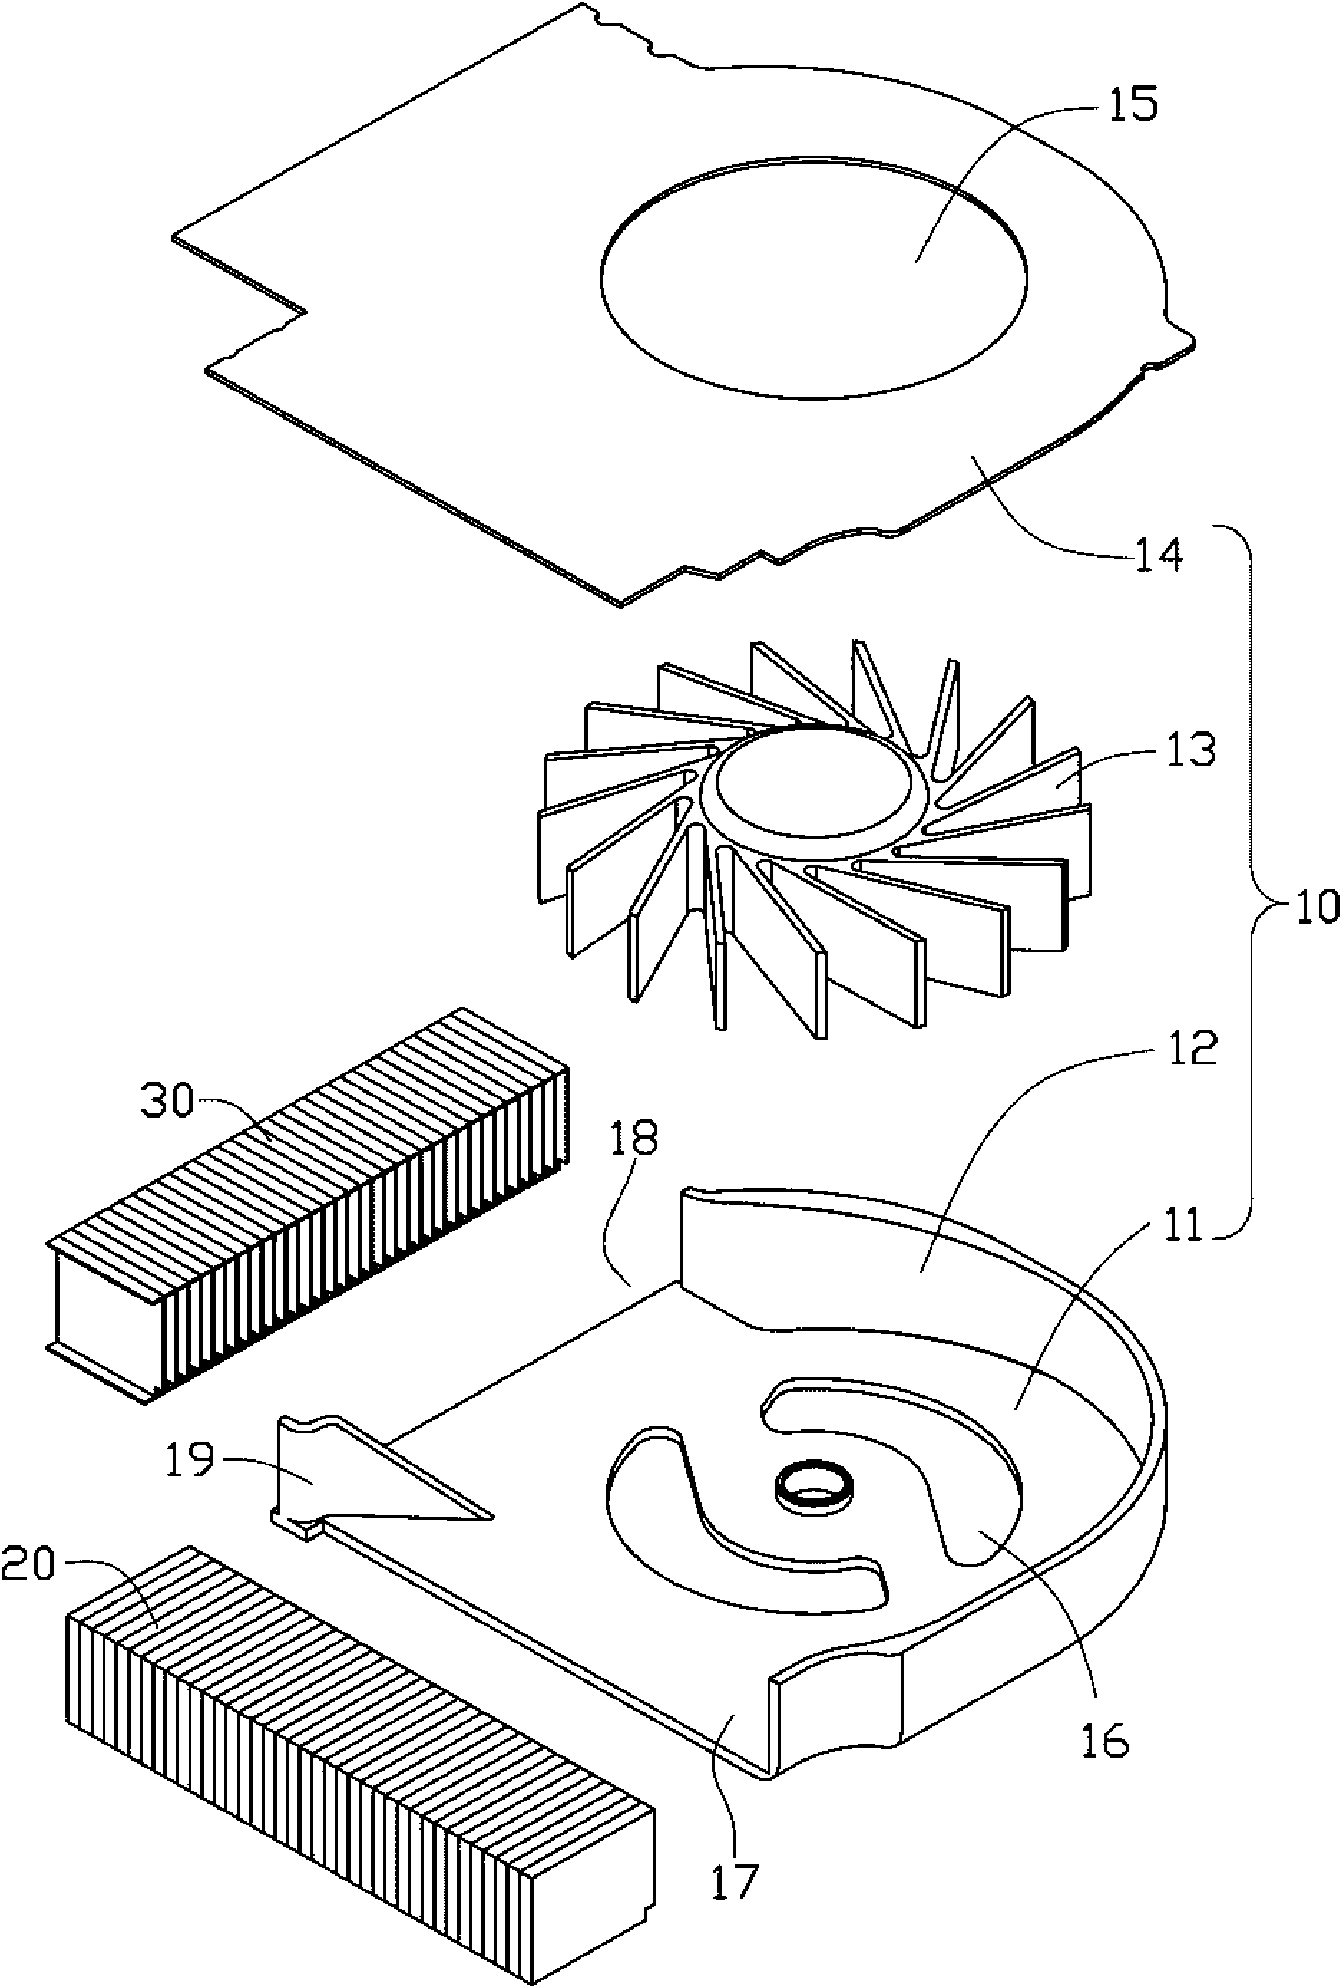 Heat sink and centrifugal fan applied by same